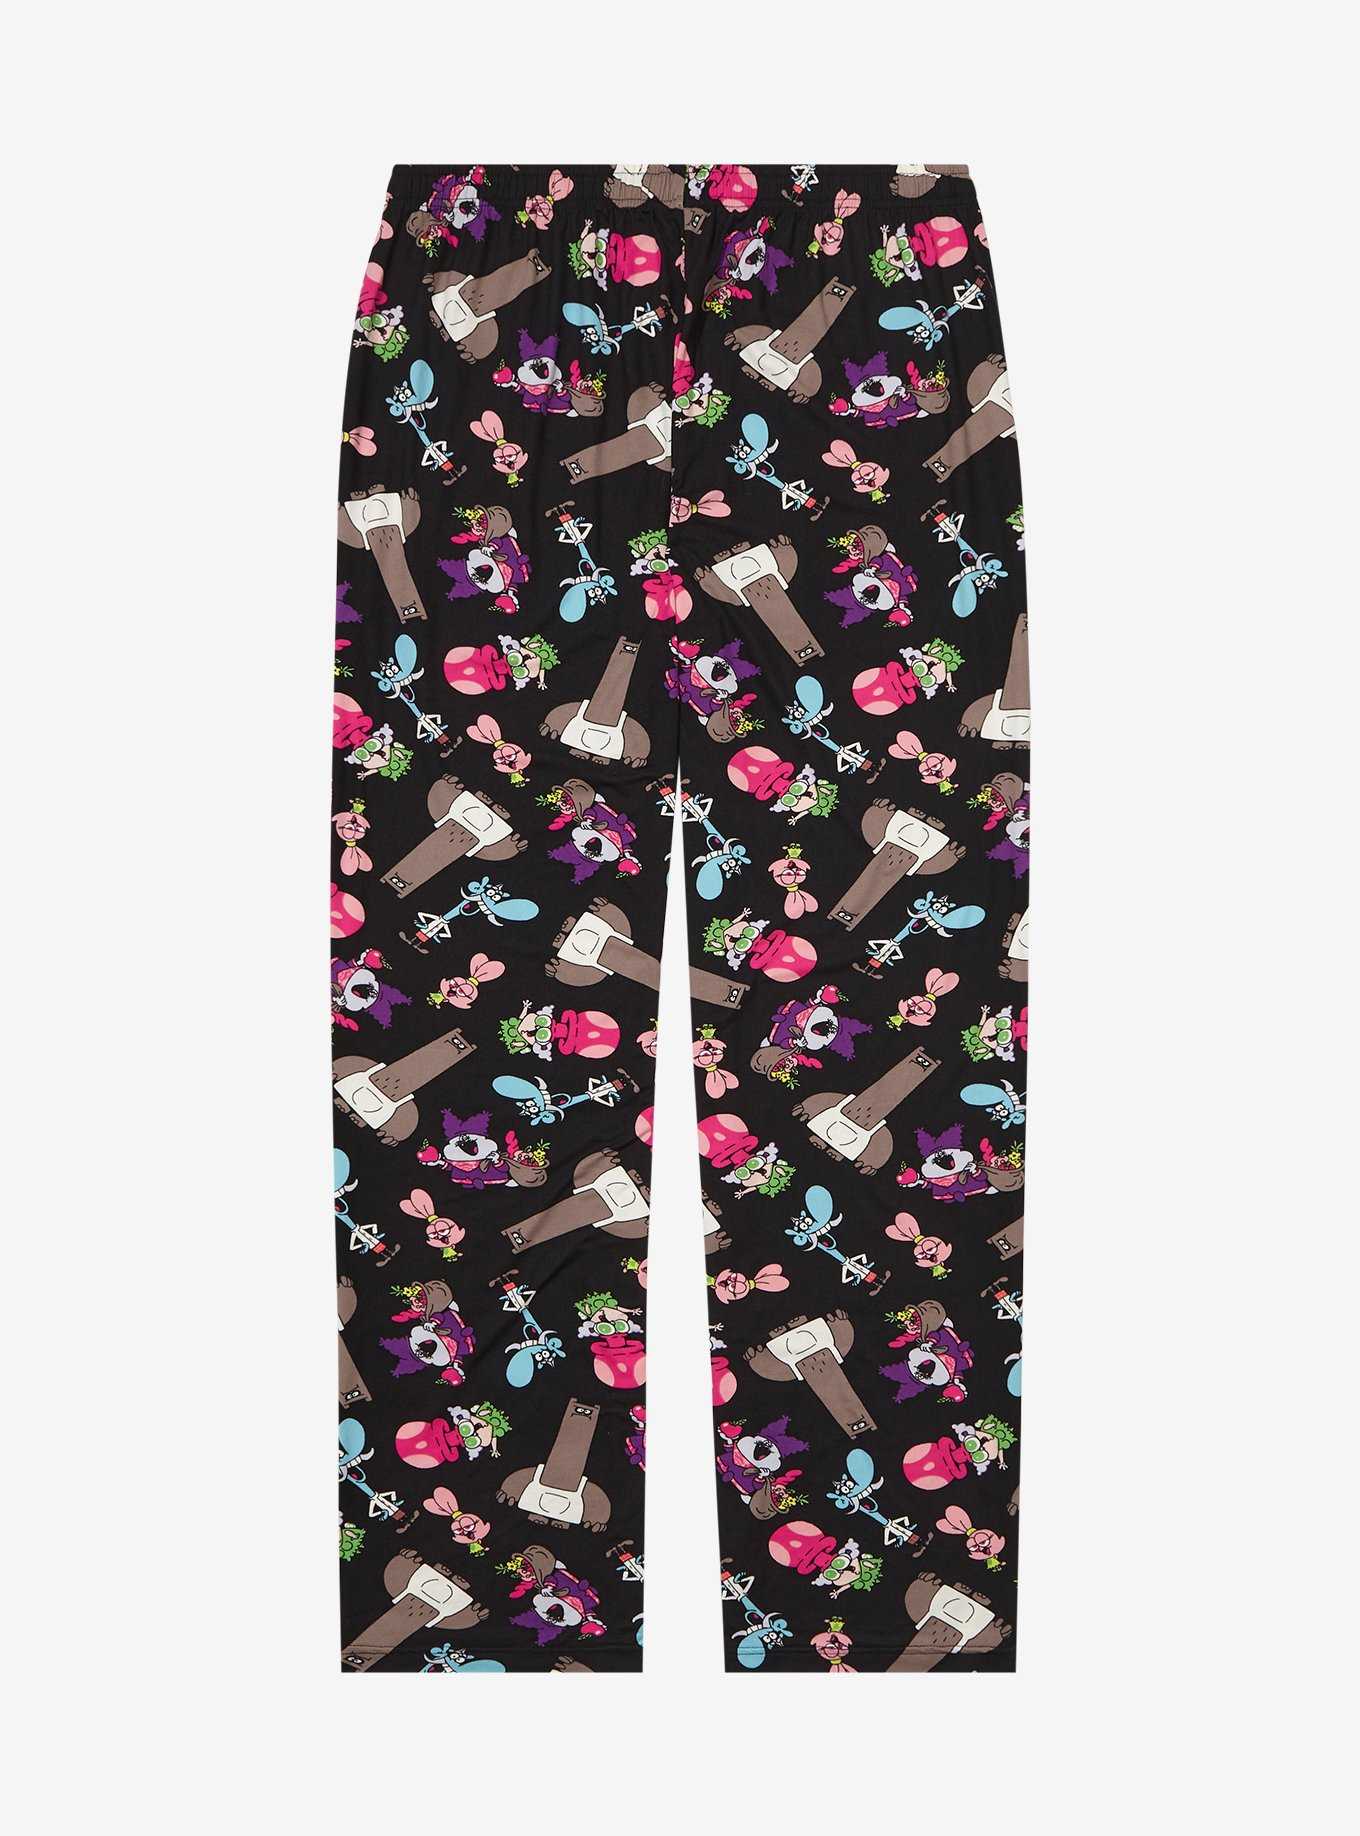 Chowder Characters Allover Print Sleep Pants - BoxLunch Exclusive, , hi-res